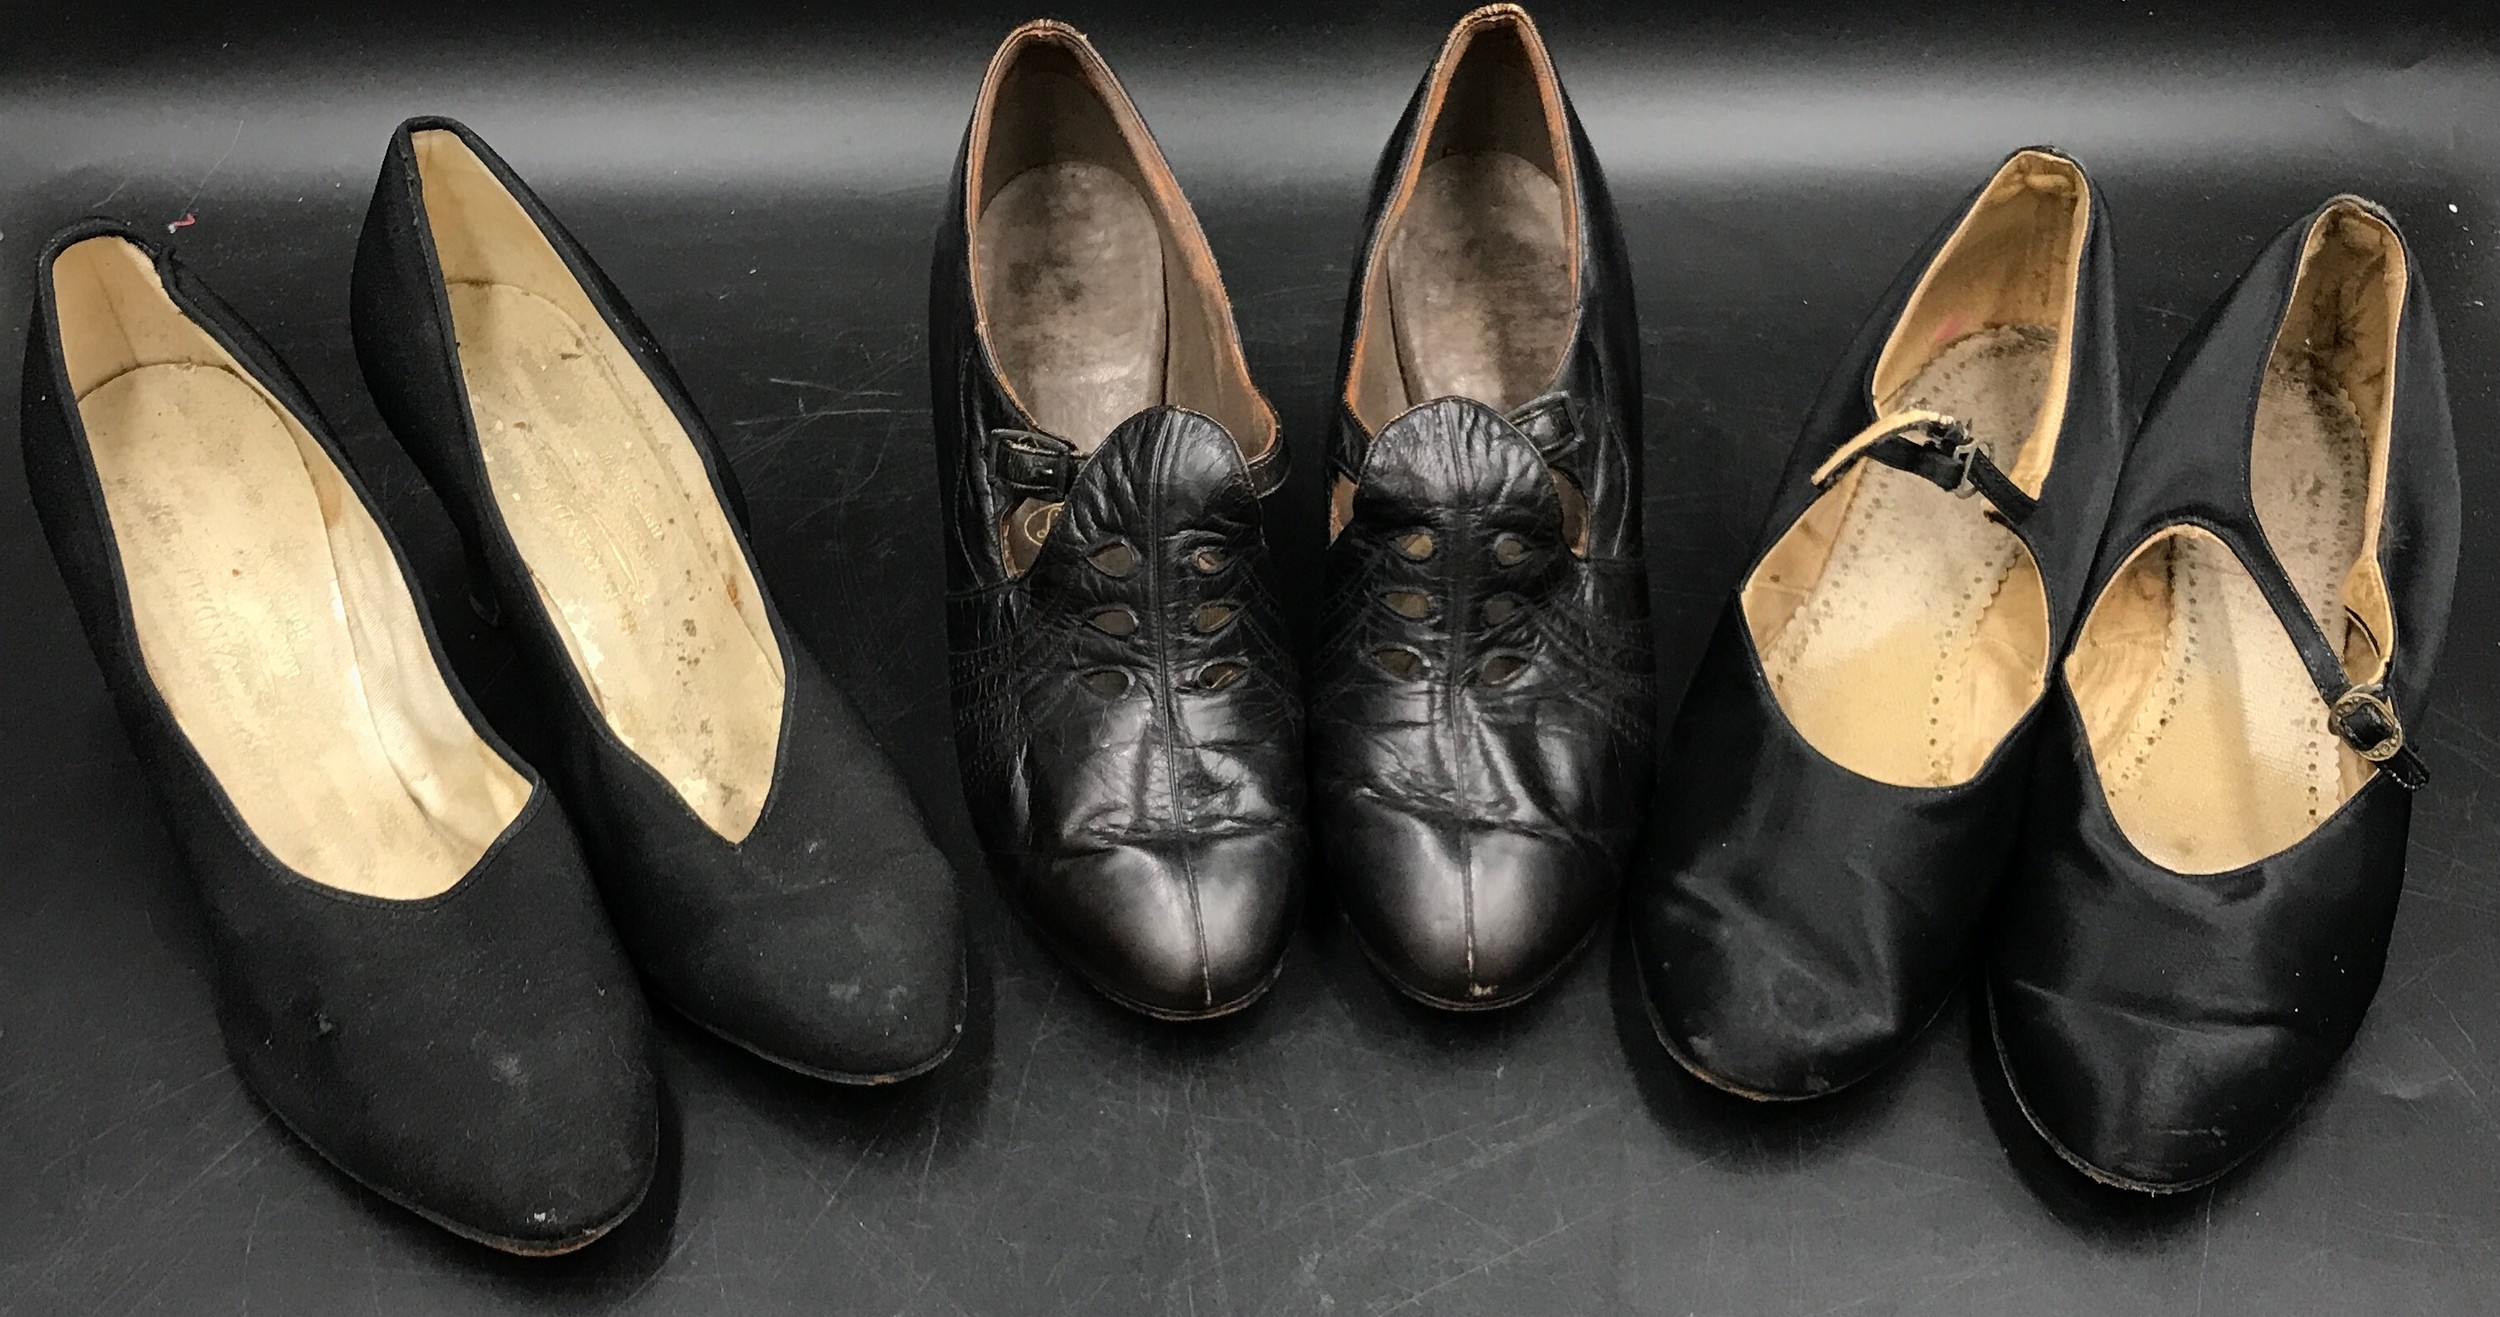 Three pairs of vintage shoes one Lotus size 5, one H E Randall size 6 and one unbranded size